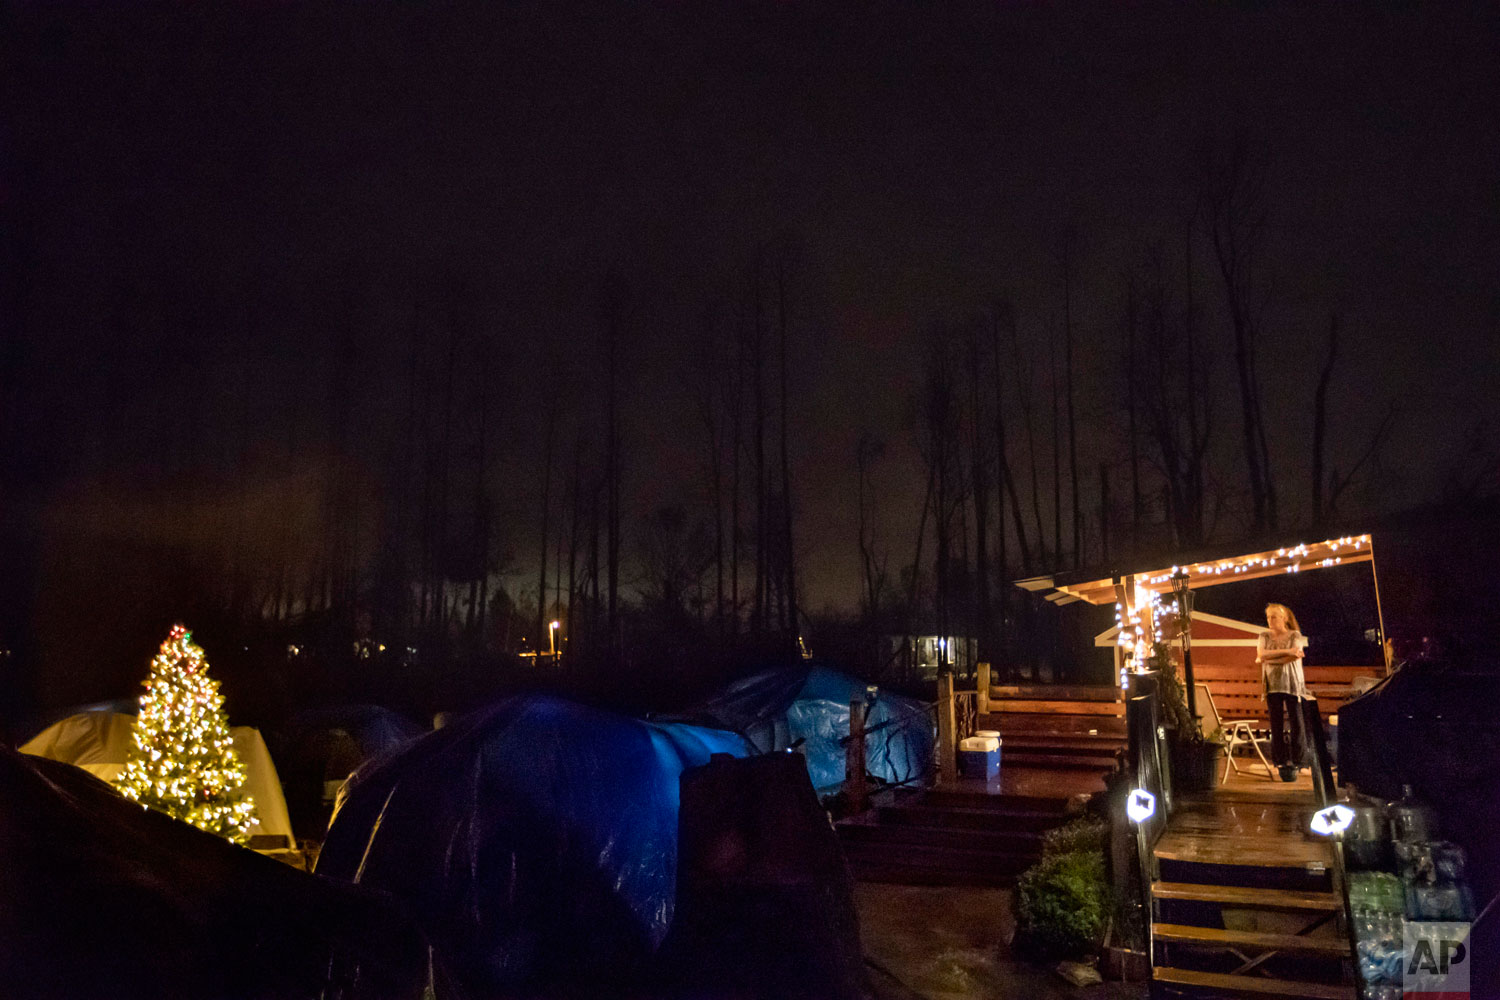  Diahnn "Shelly" Summers, right, looks out over the tents she set up in her backyard for  homeless Hurricane Michael evacuees in Youngstown, Fla, Wednesday, Jan. 23, 2019. "There is nowhere for them to go," Summers said. "When you don't have a home, 